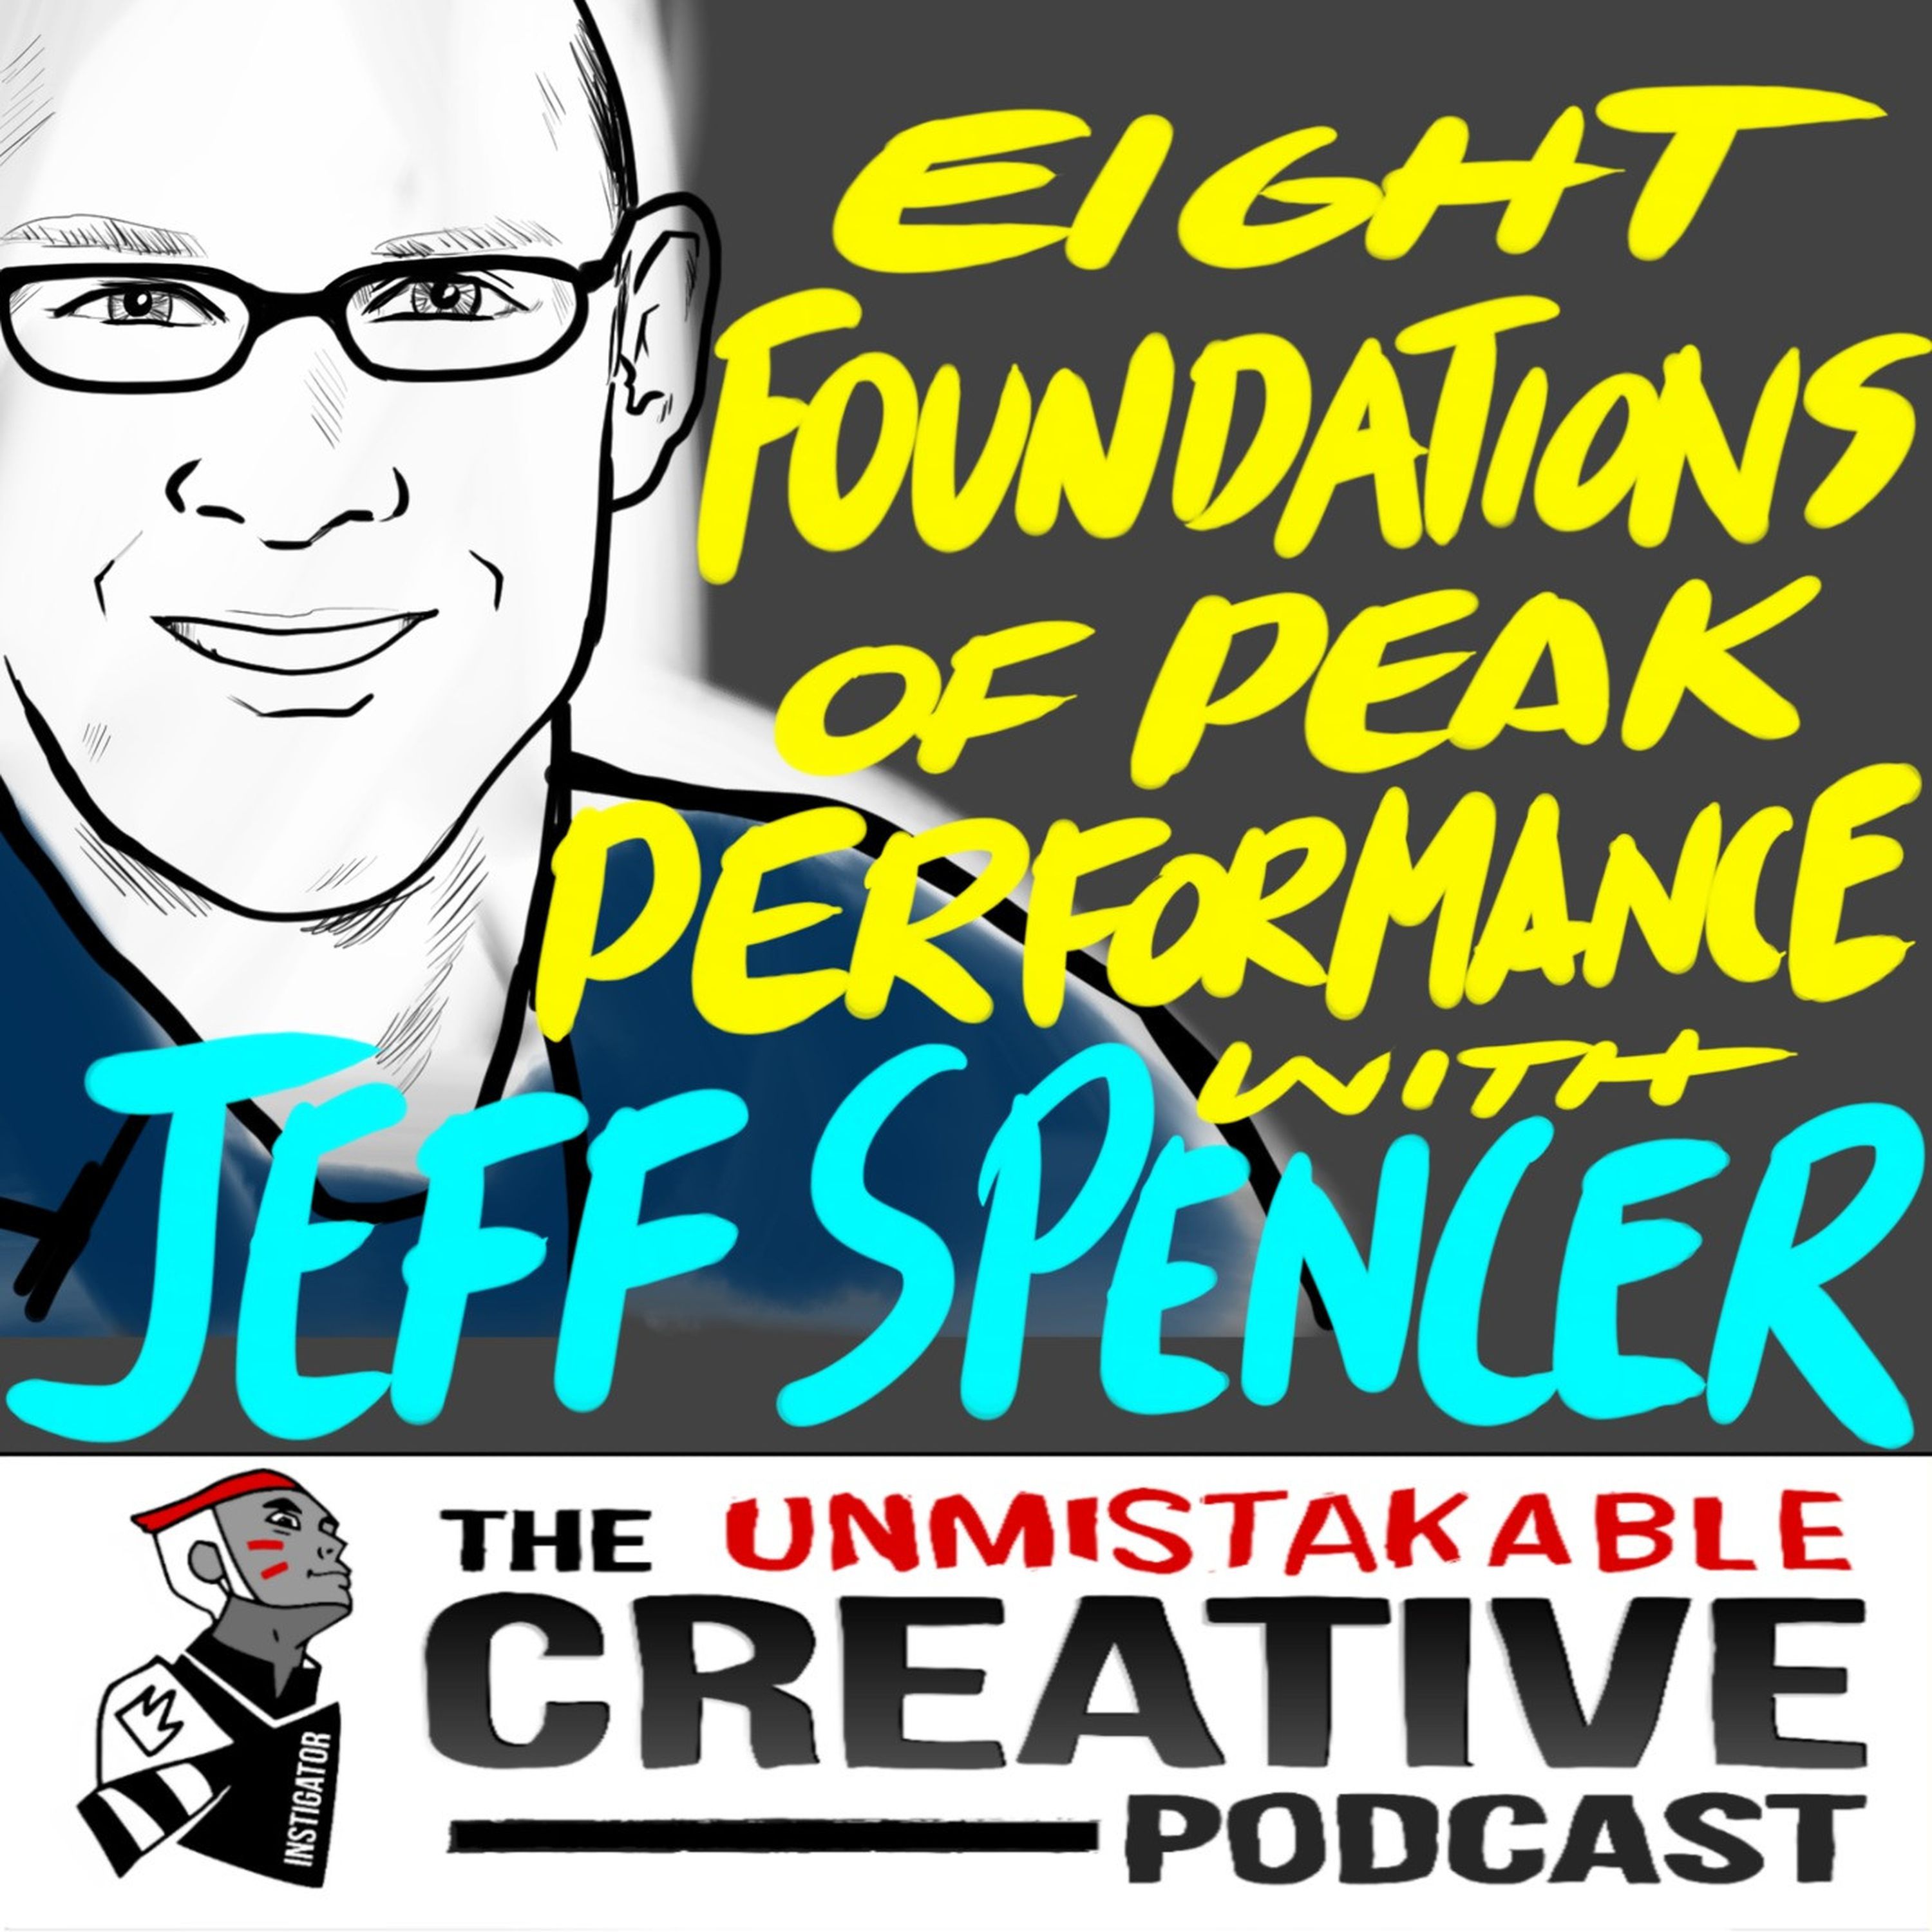 The 8  Foundations of Peak Performance with Jeff Spencer Image